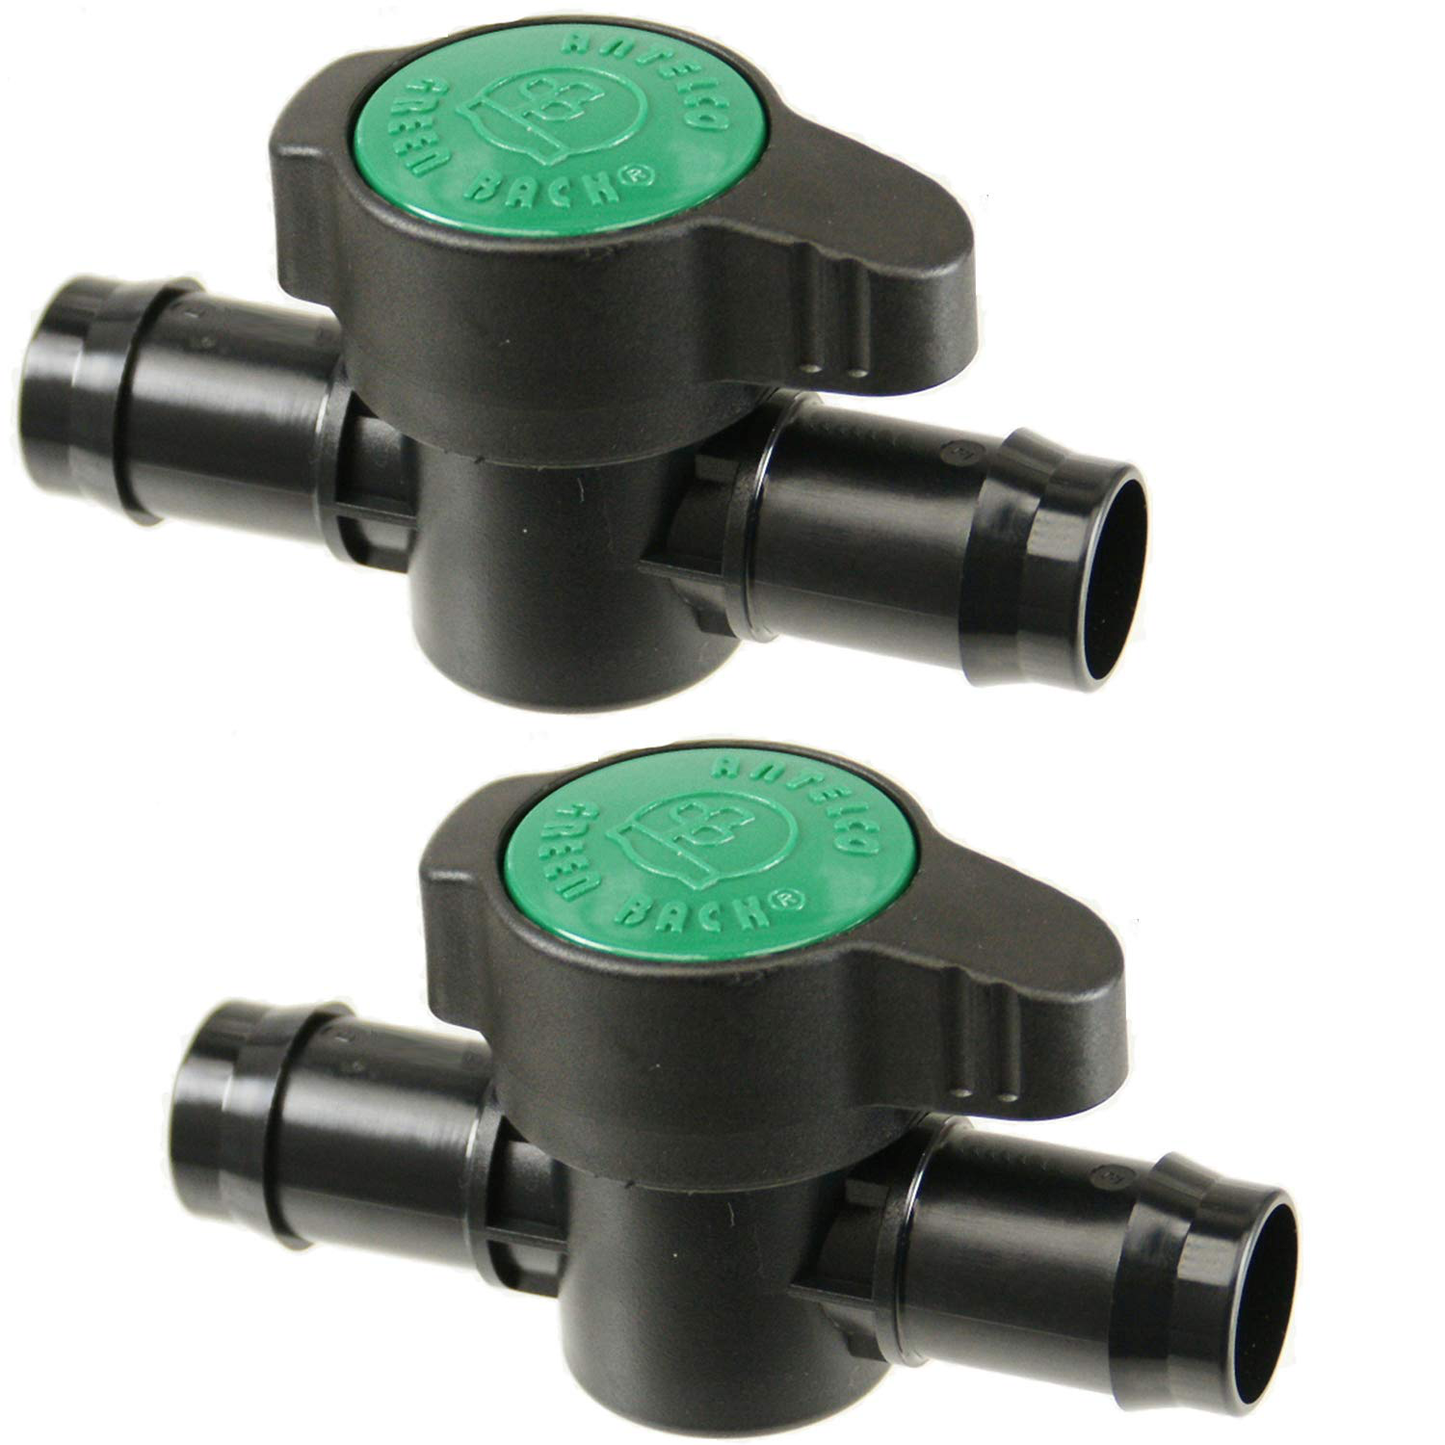 Habitech 2-Pack In-Line Barbed Ball Valve 13Mm for 1/2 Inch Tubing .520 ID - Regulate and Shut-Off/On Water Flow